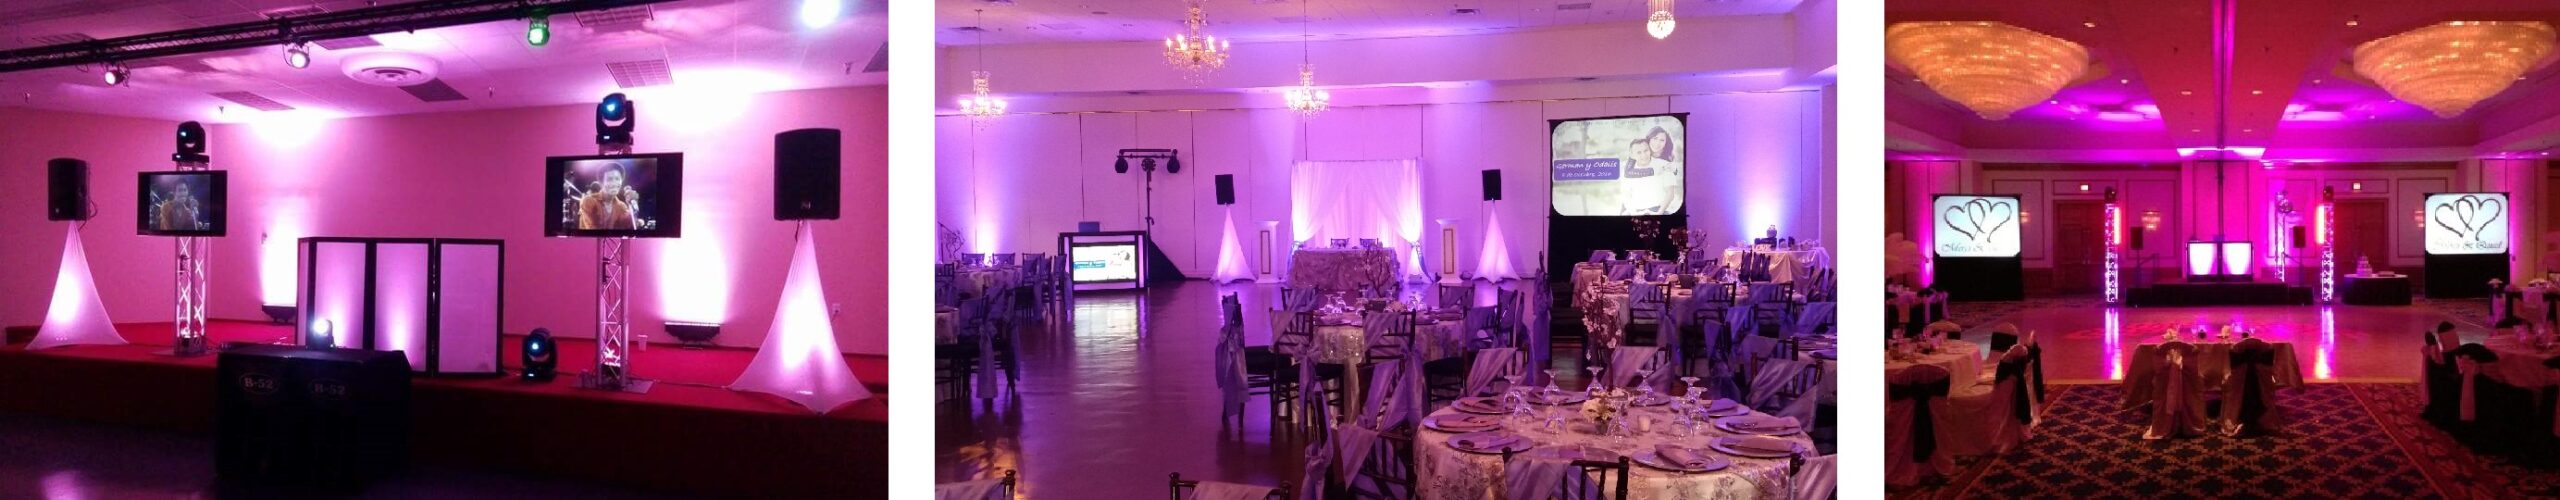 Houston Weddings, Weddings in Houston, Houston Audio Visual, Video Projection, Rear Screen Projection, Flat Screen TVs, Up lights, Awesome Music Entertainment, Awesome Event Pros, Awesome Lighting Decor, AME DJs, Sonido DJ Sammy de Houston